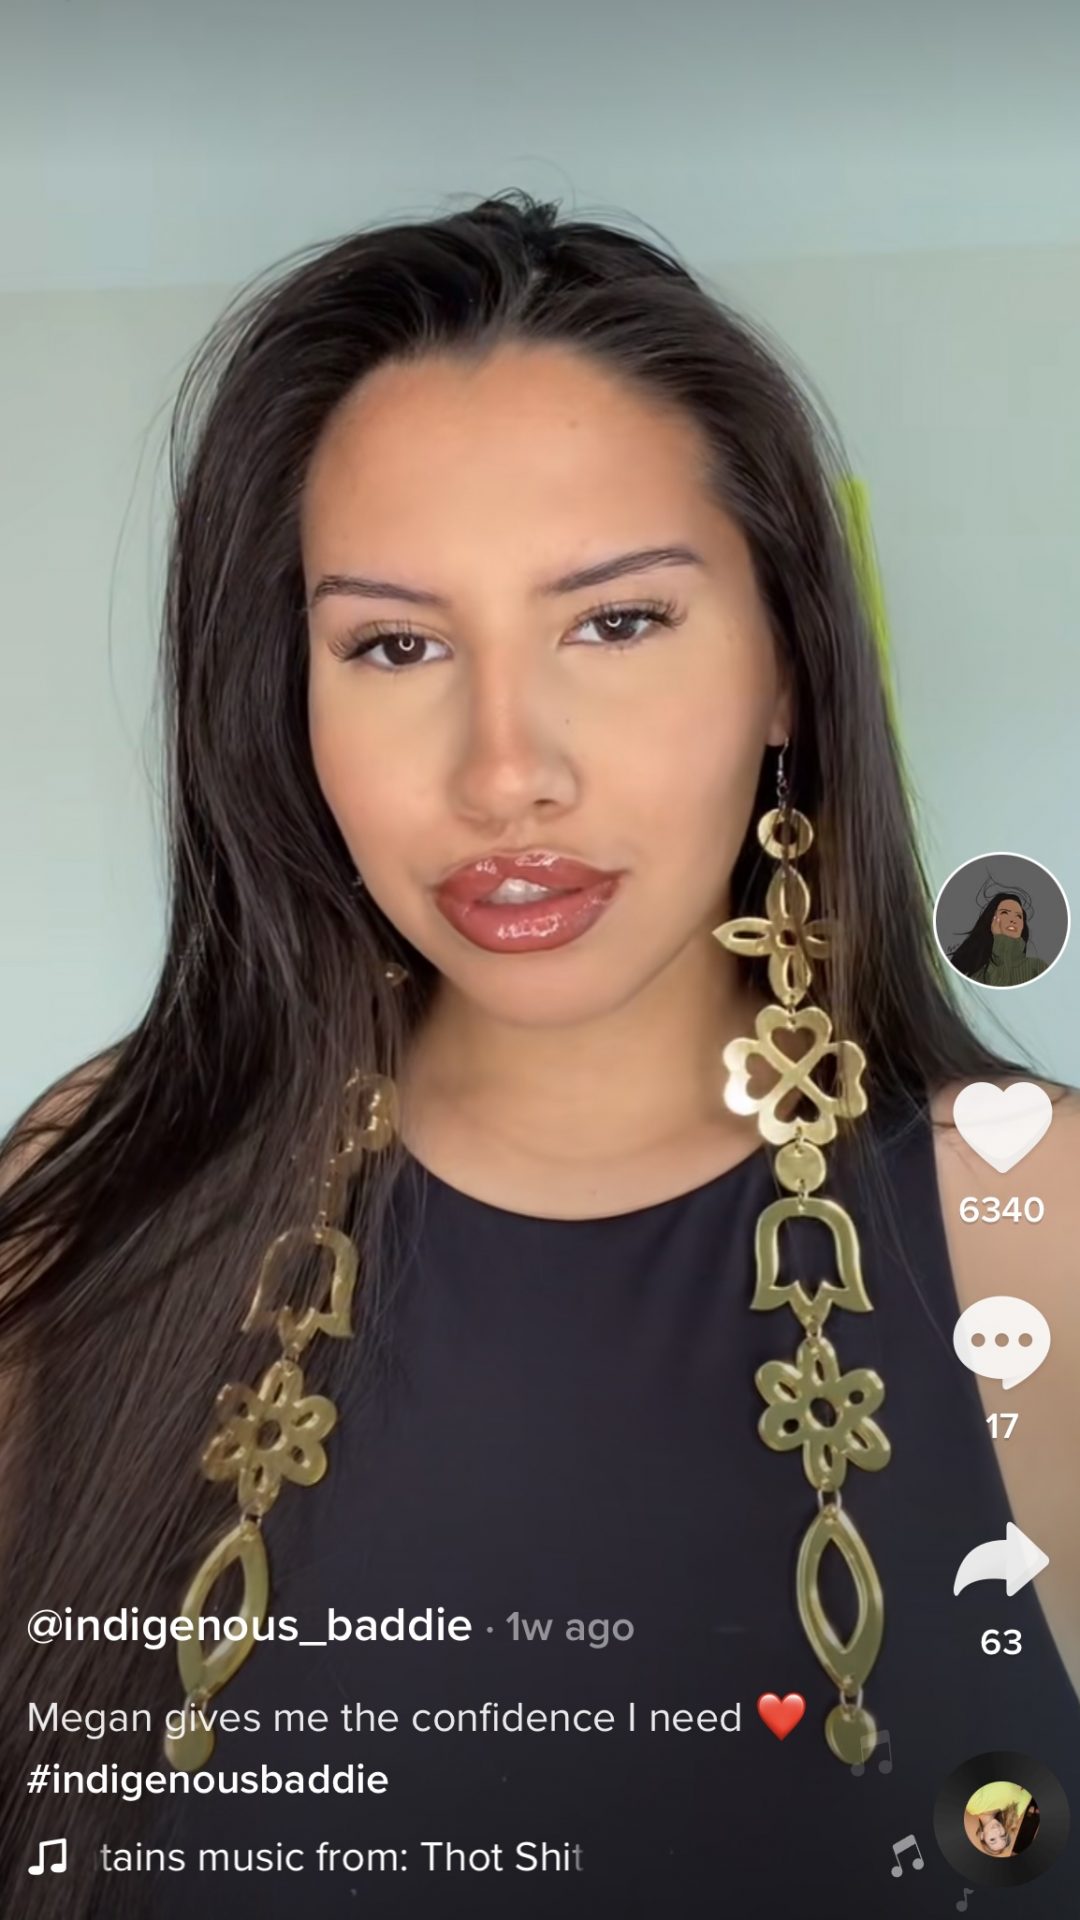 Screenshot image of an Indigenous female TikTok influencer with long brown hair and large gold Indigenous earrings looking at the camera